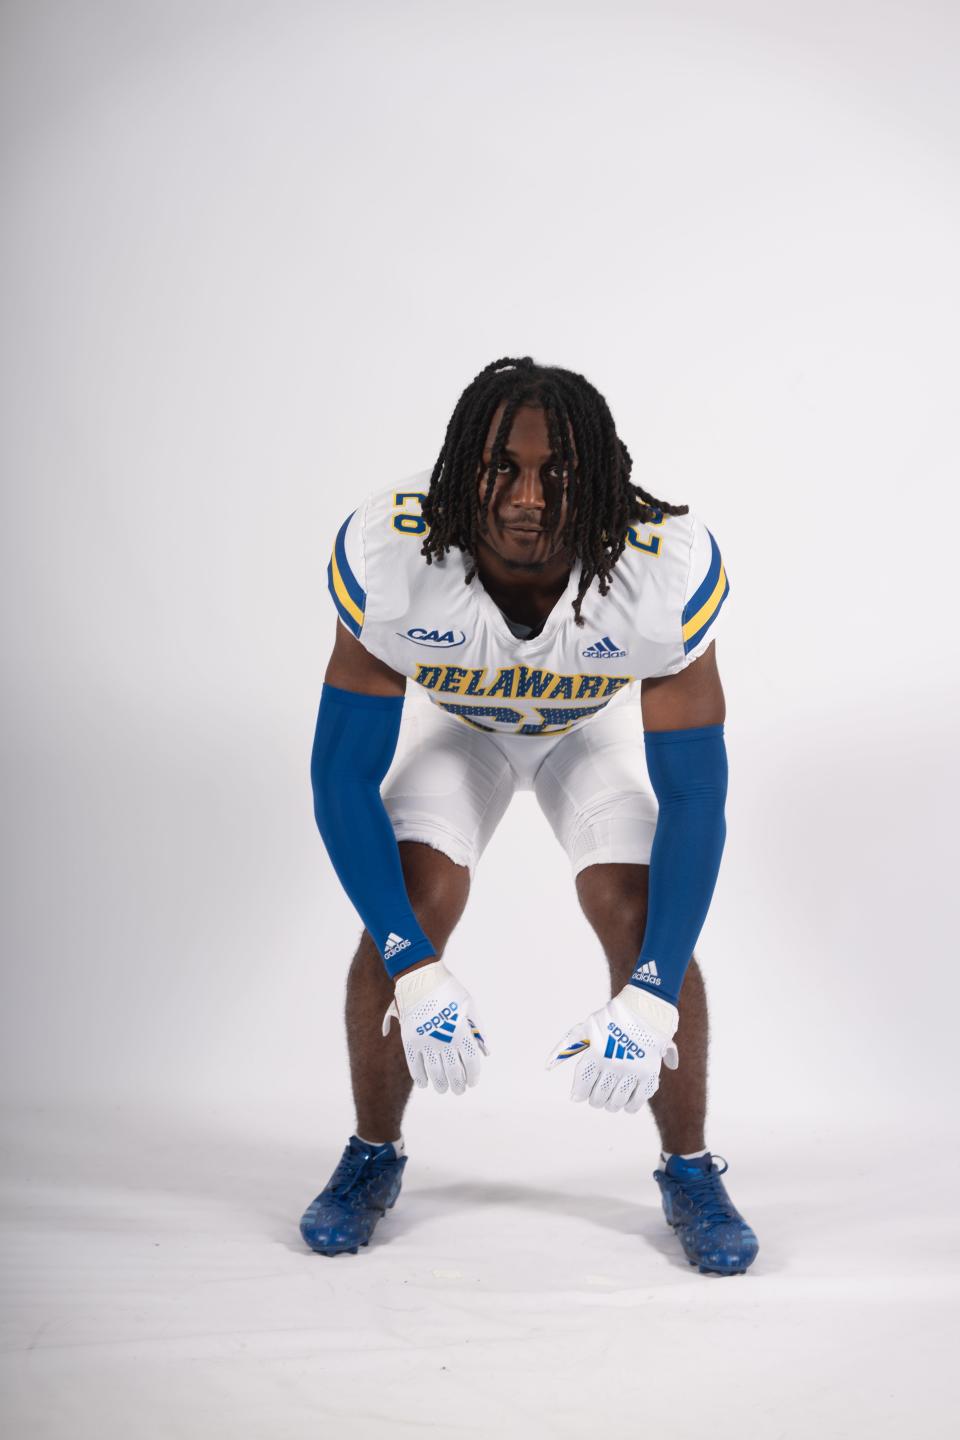 Delaware cornerback A'Khoury Lyde spent his freshman year at Wisconsin.